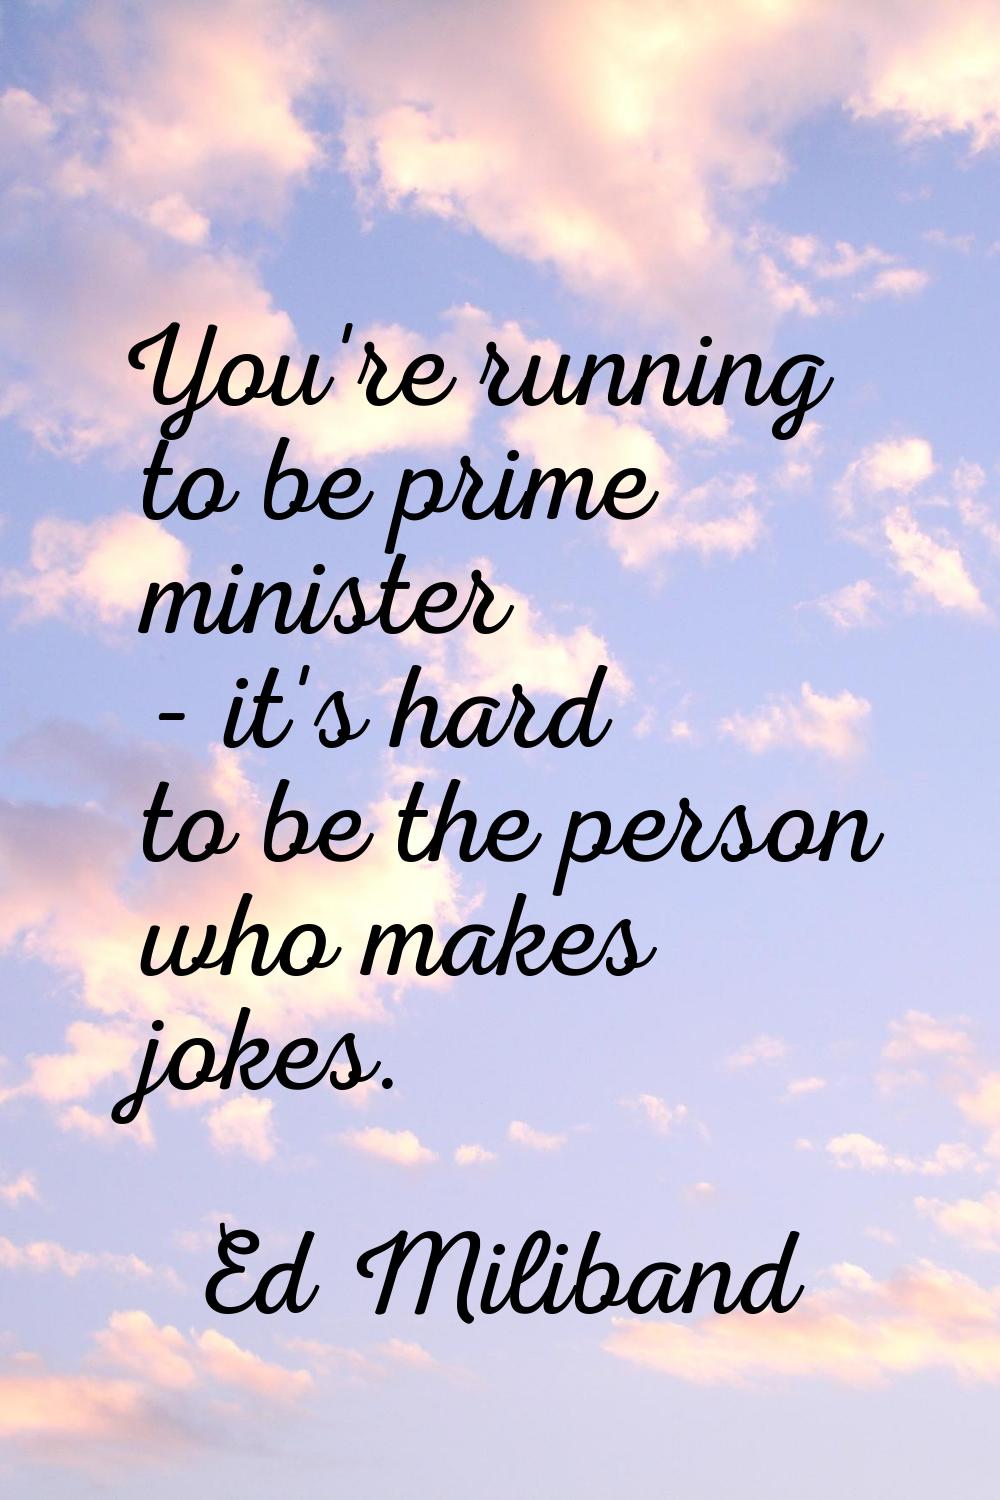 You're running to be prime minister - it's hard to be the person who makes jokes.